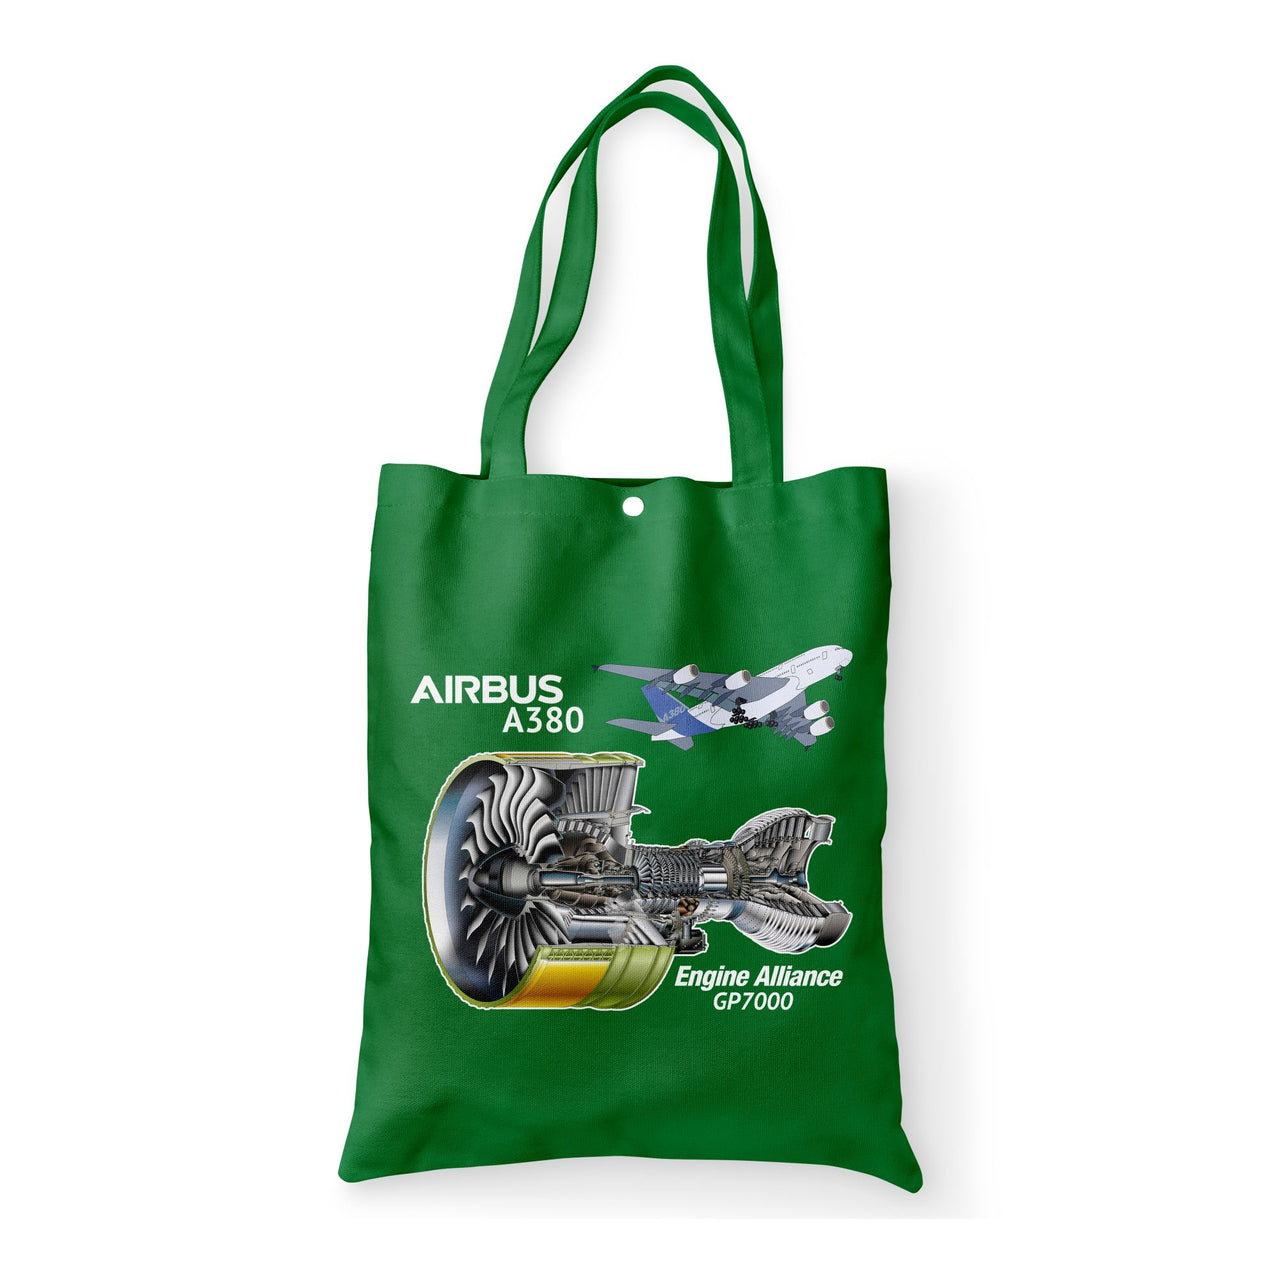 Airbus A380 & GP7000 Engine Designed Tote Bags